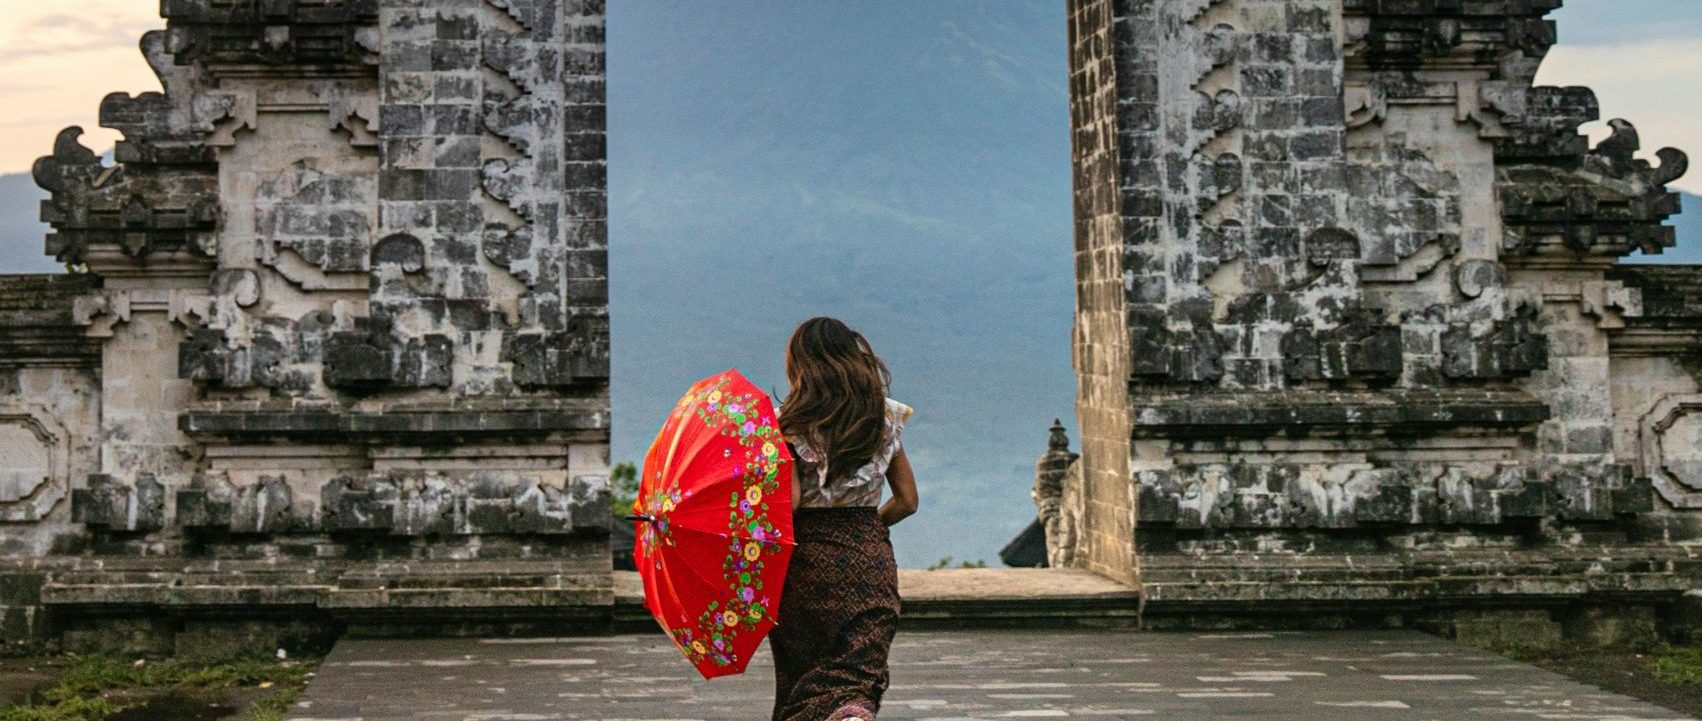 5 Best Places to Visit in Bali – From Kuta to Uluwatu